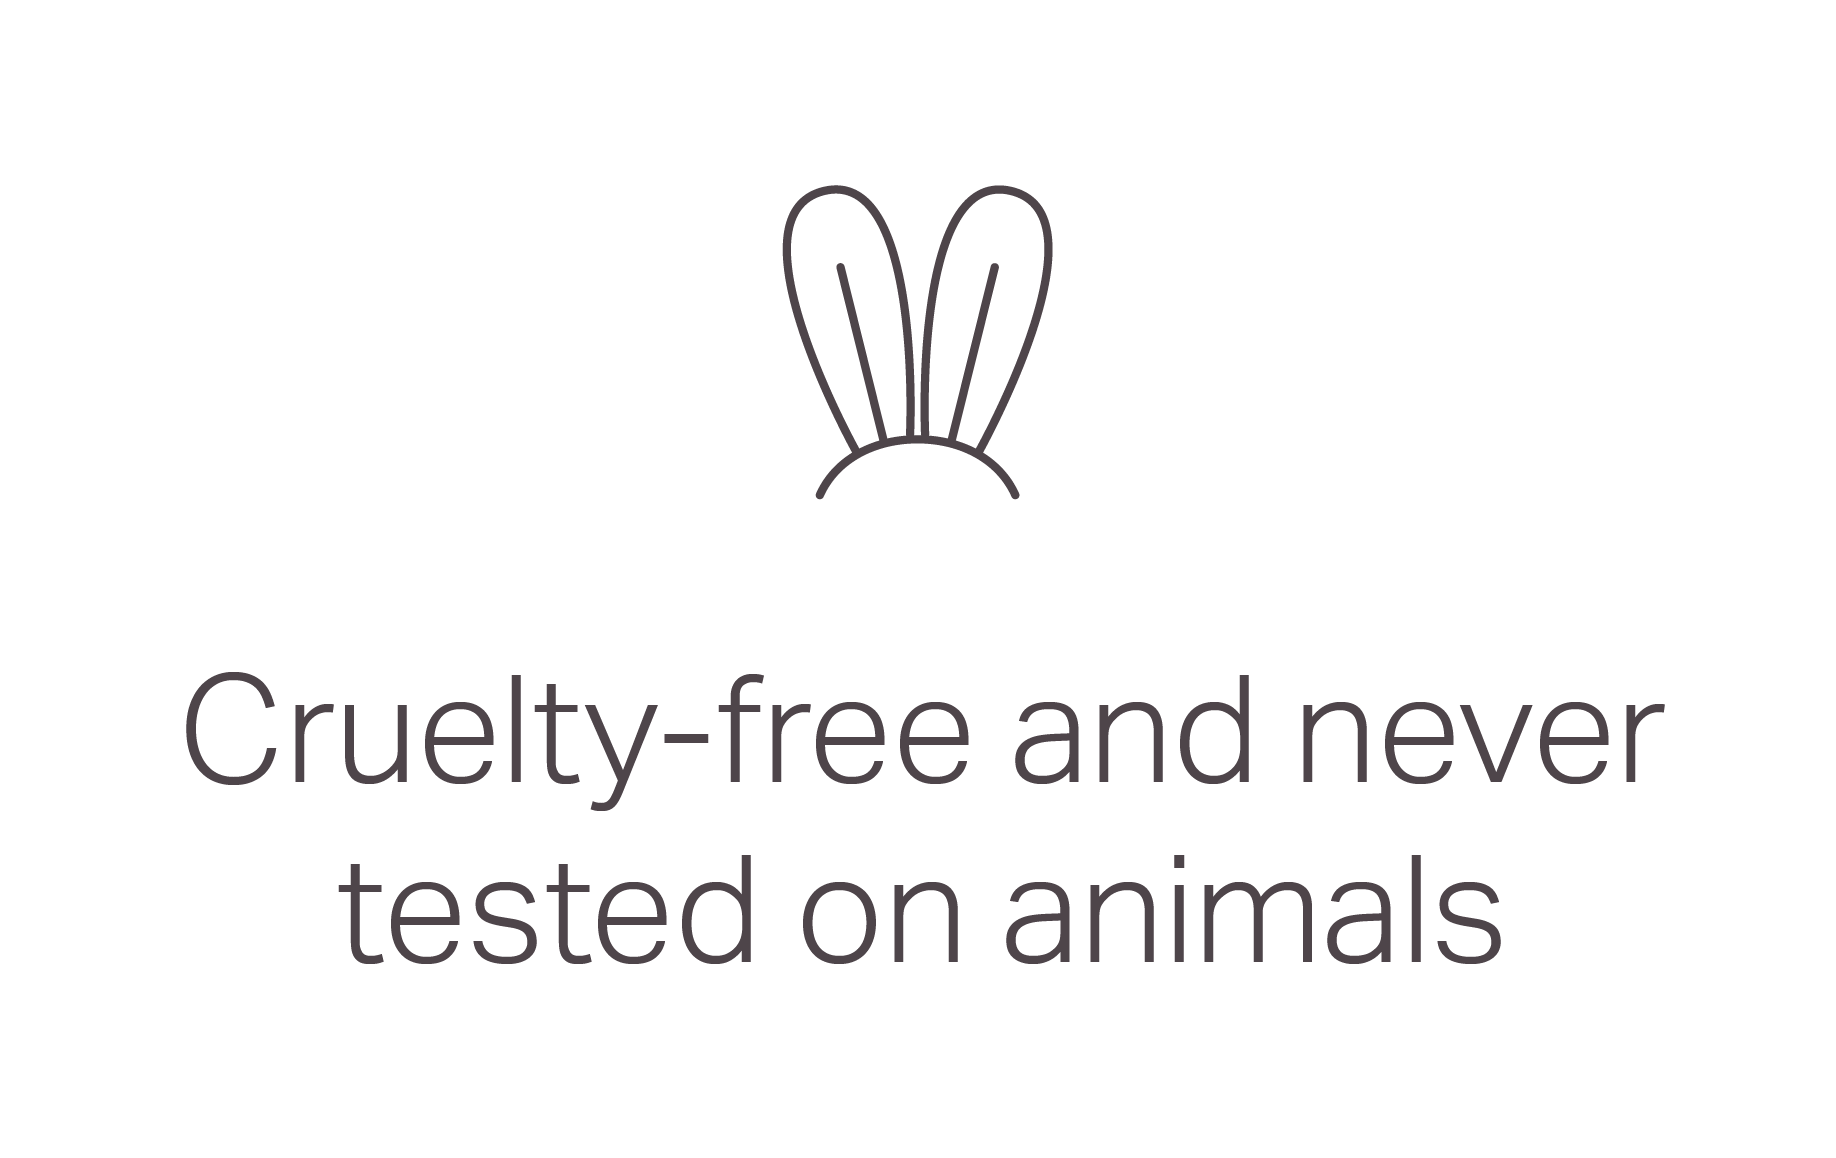 Cruelty-free and never tested on animals